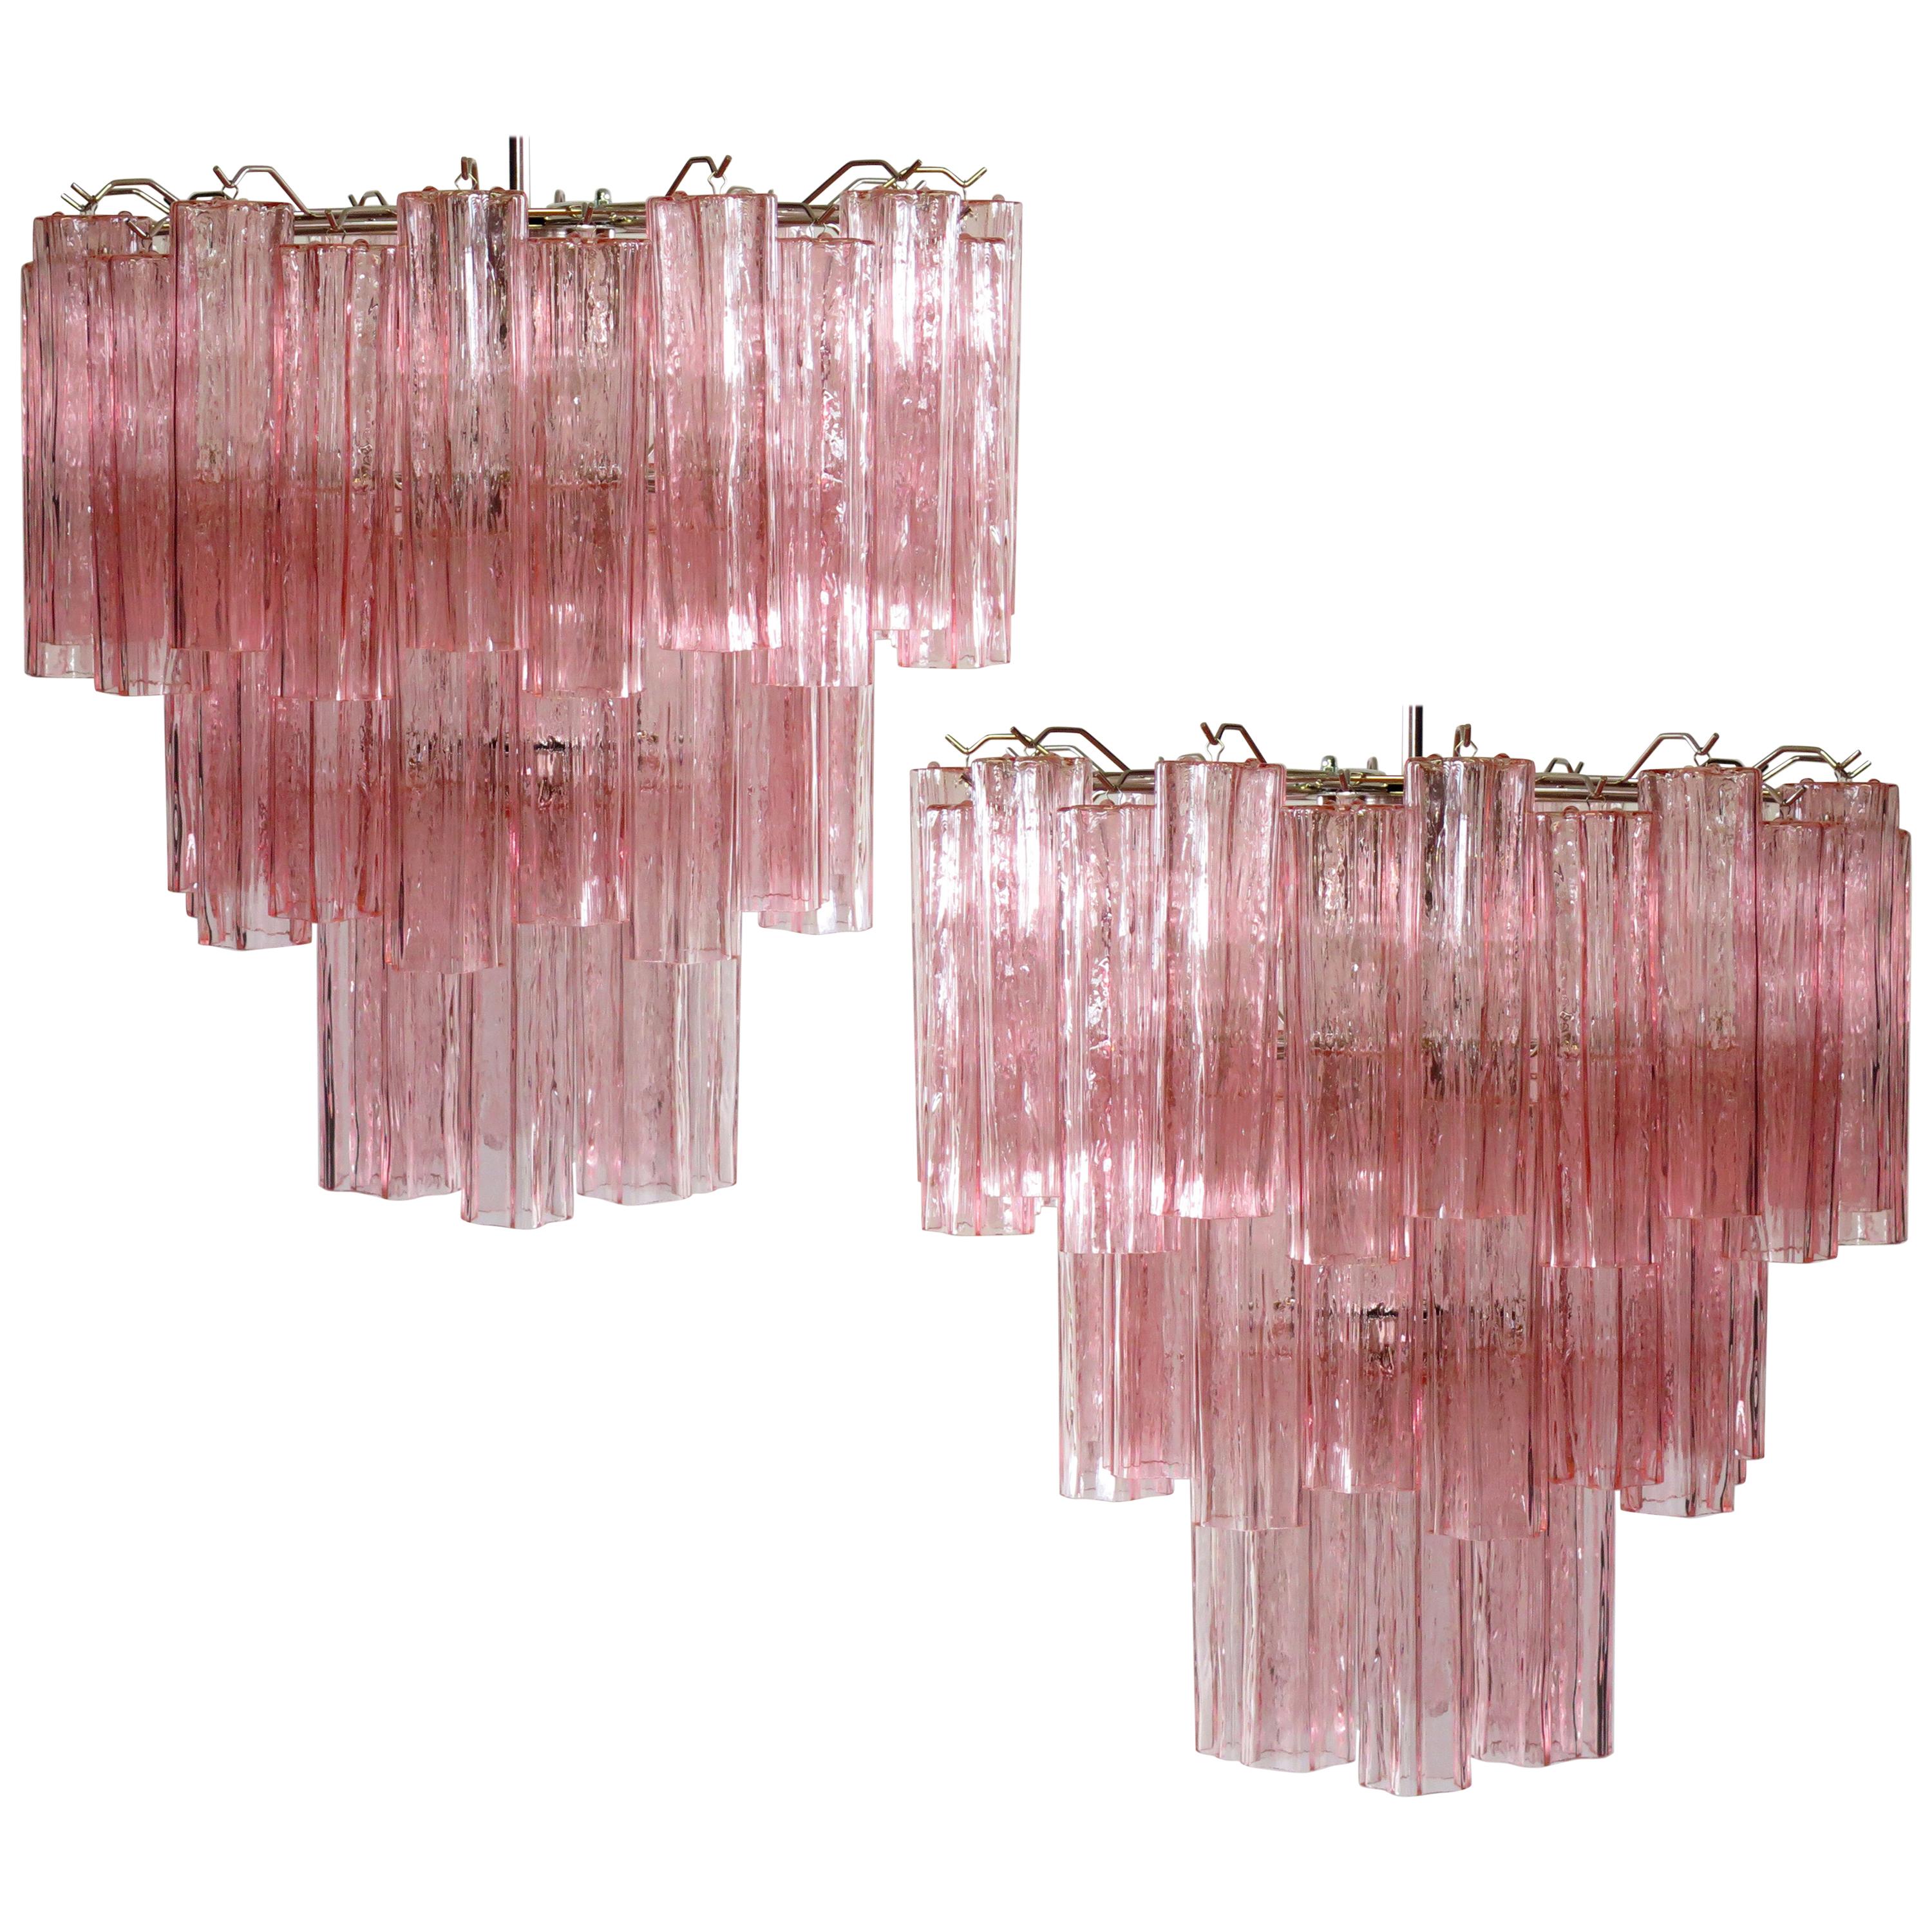 Three-tier Murano glass tube chandelier, 48 pink glasses, Mid-Century Modern
Italian vintage chandelier in Murano glass and nickel-plated metal structure. The armour polished nickel supports 48 large pink glass tubes in a star shape. The glasses